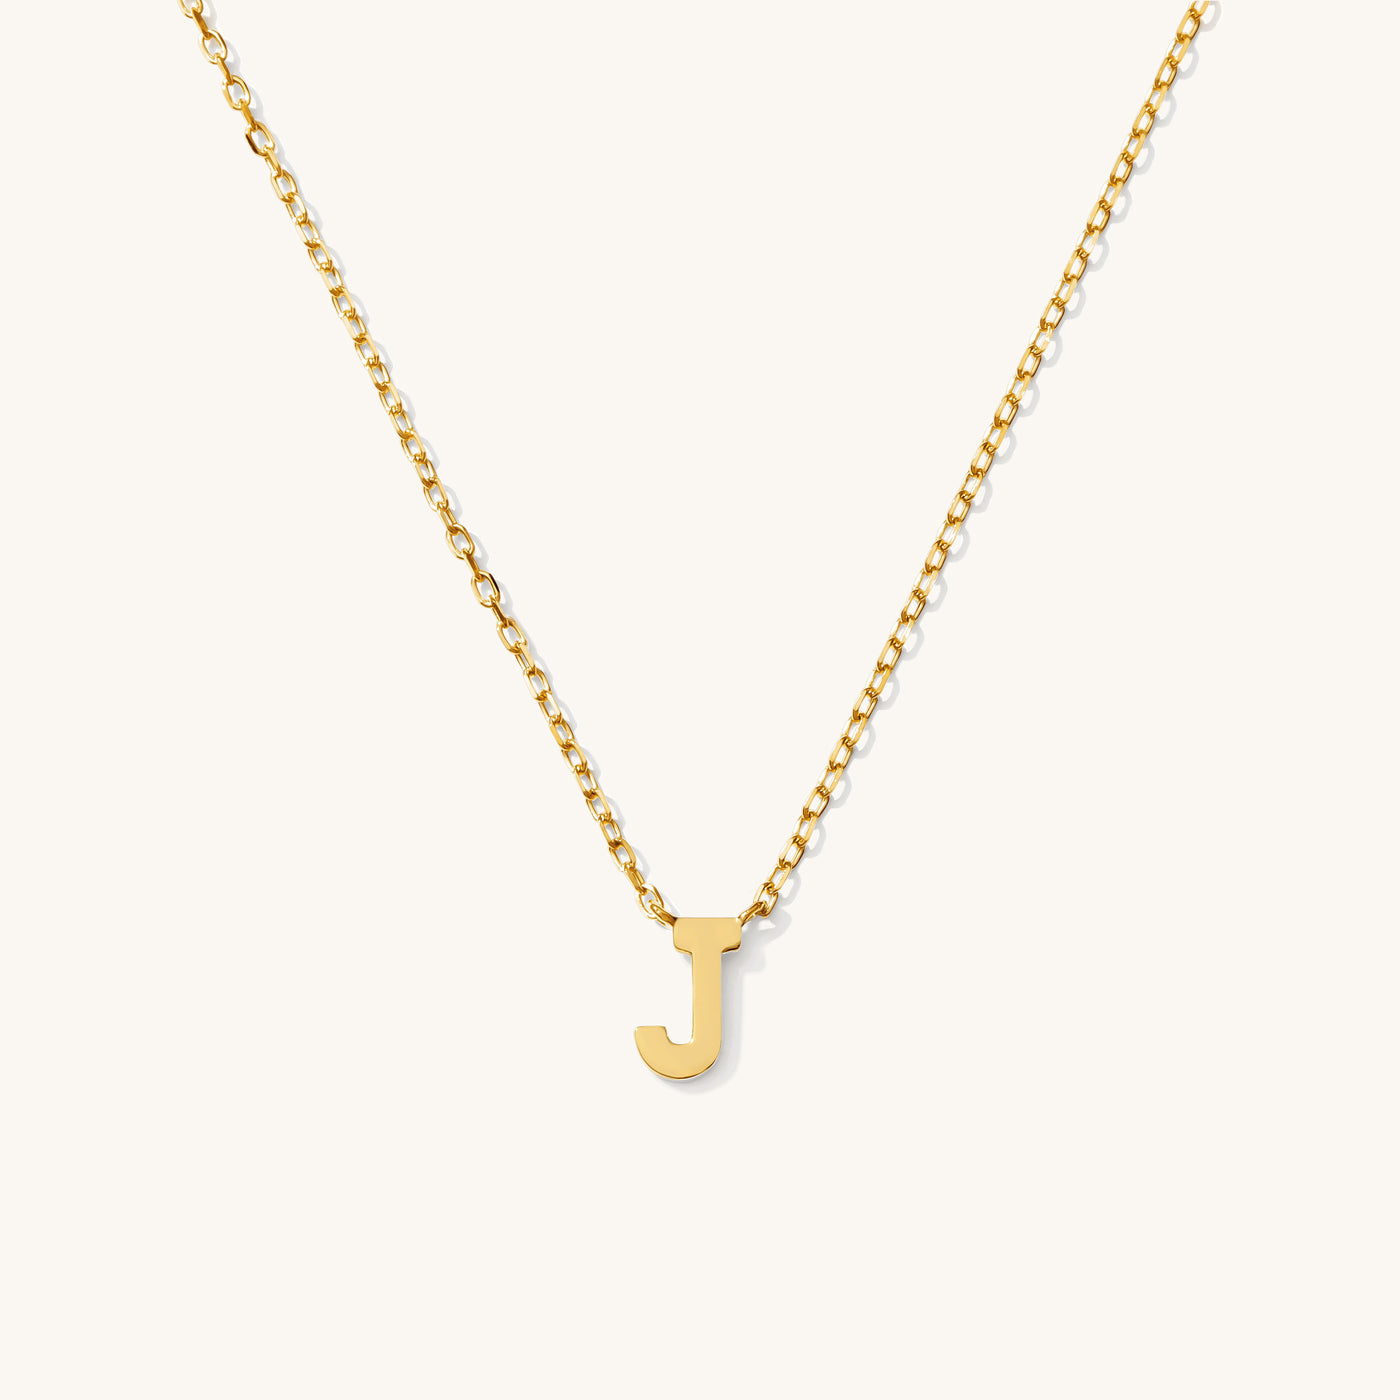 J Tiny Initial Necklace - 14k Solid Gold